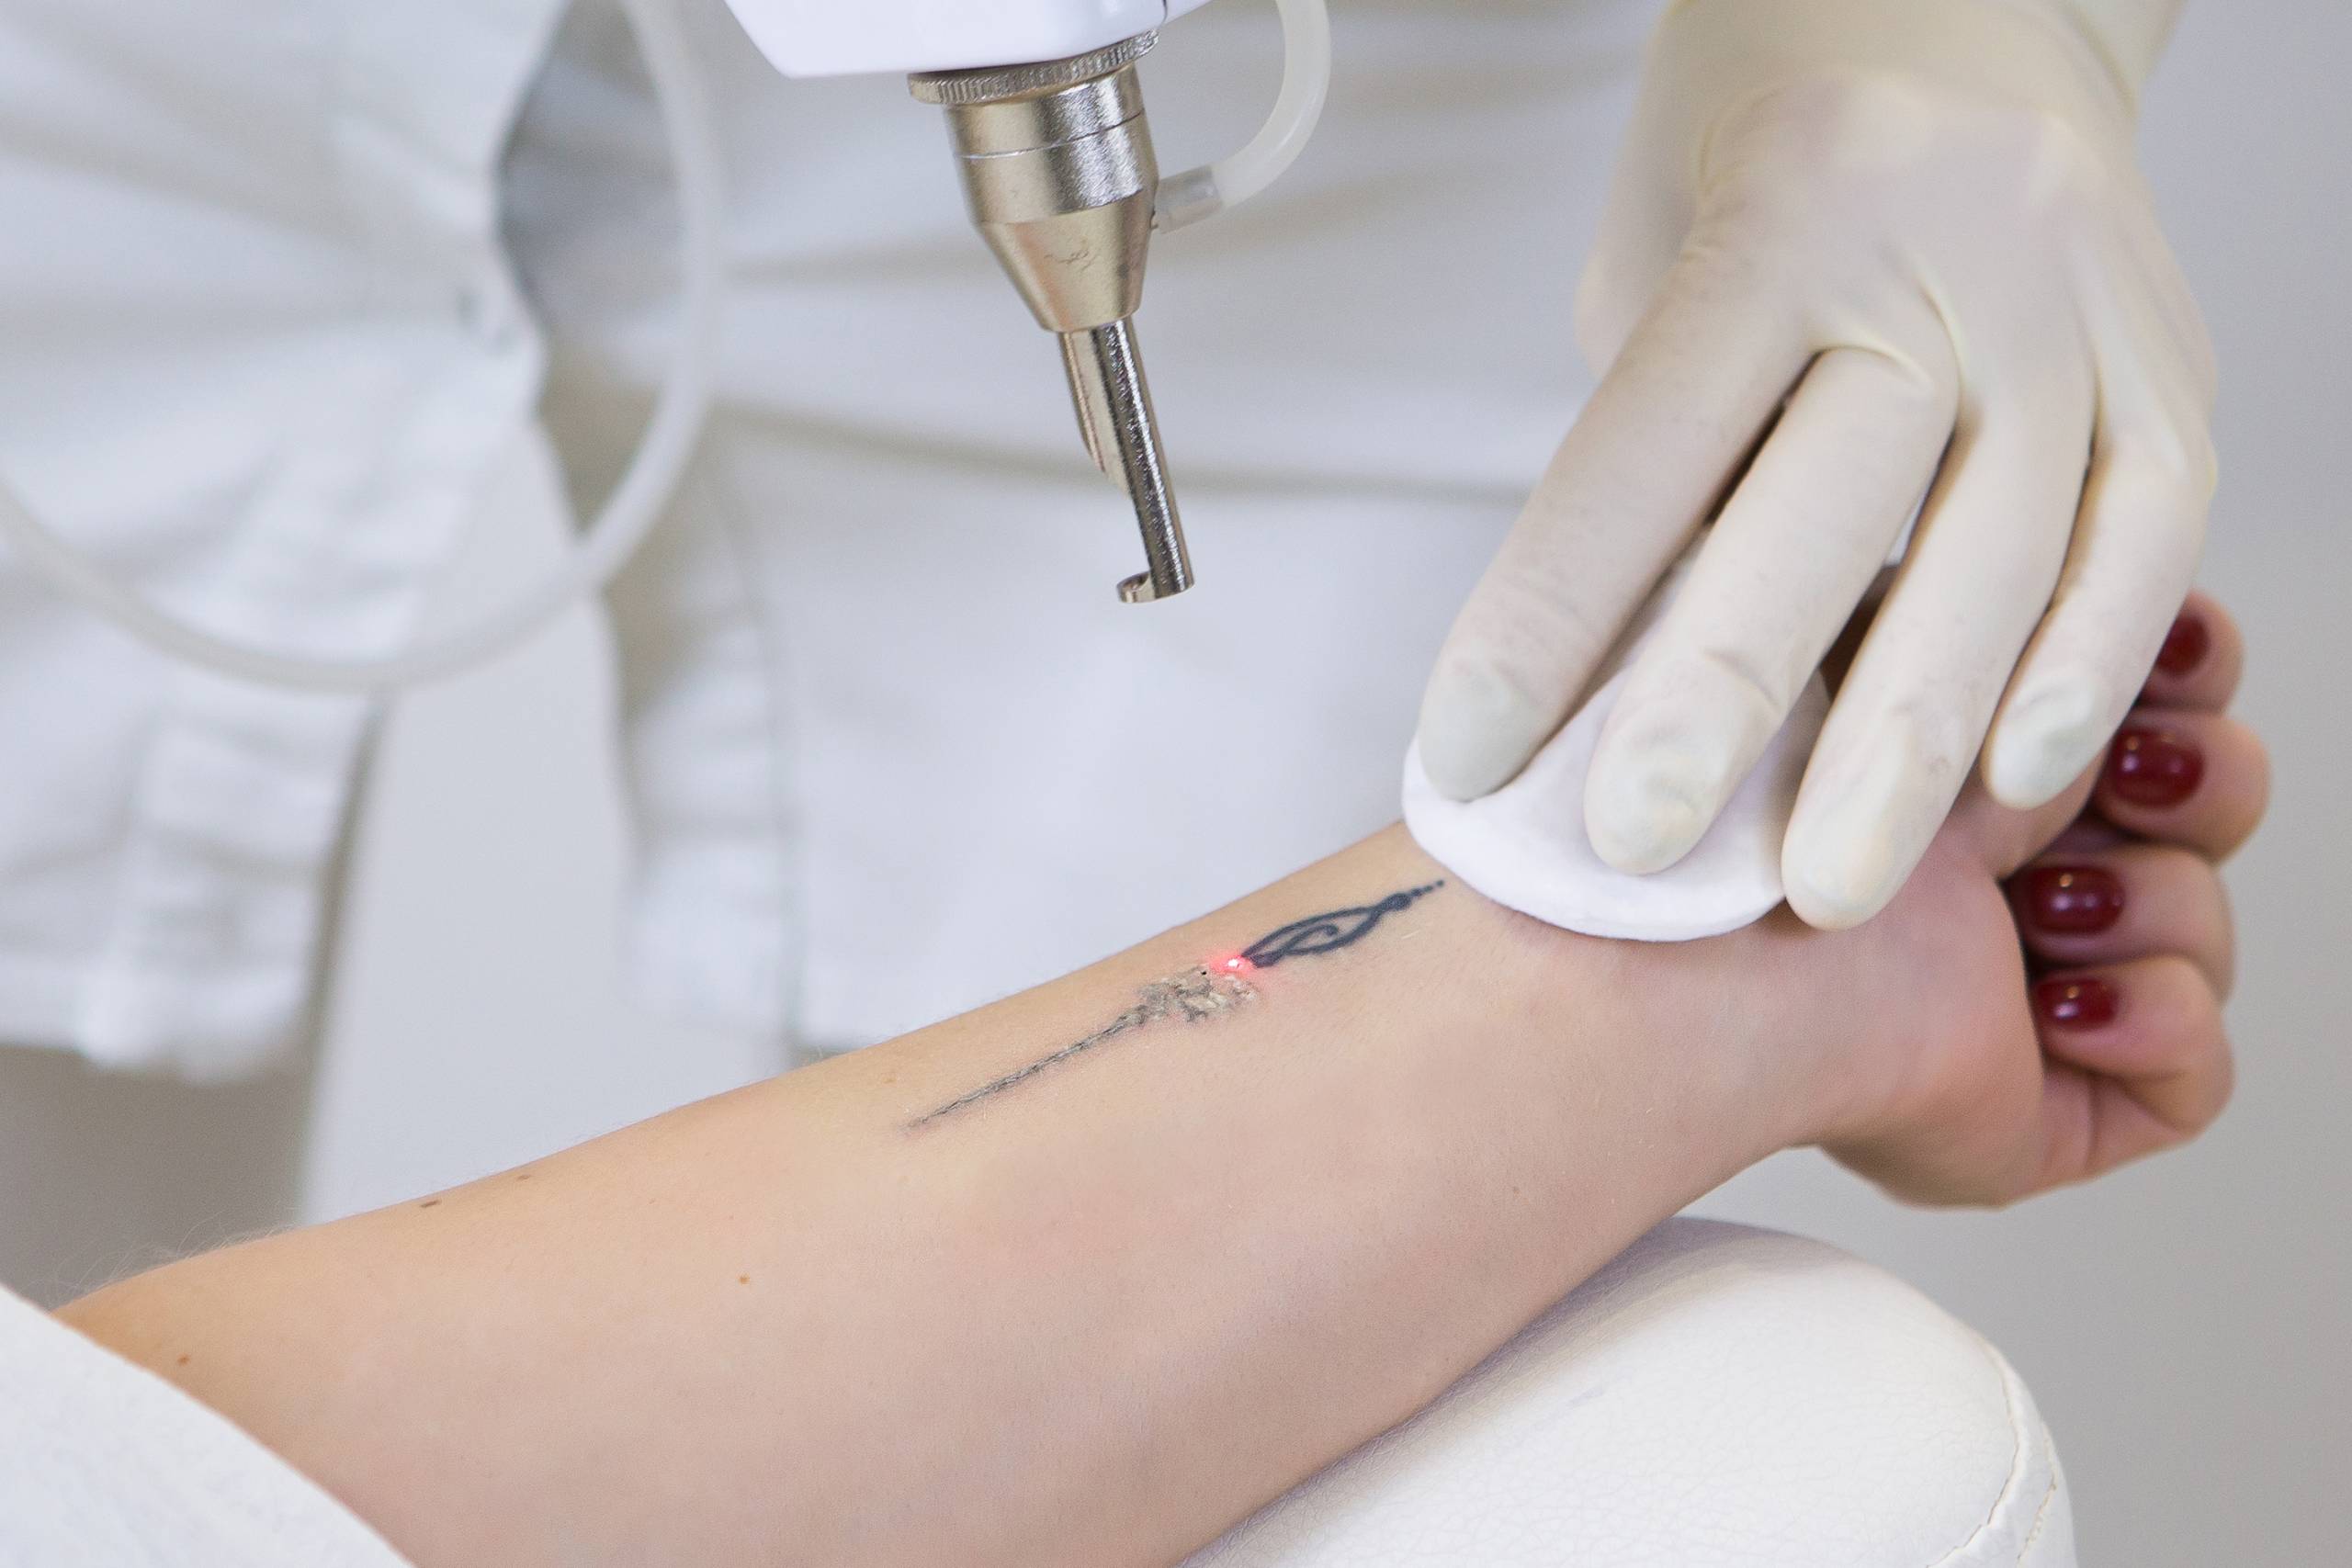 Laser Tattoo Removal Treatment in Delhi Tattoos are effectively removed